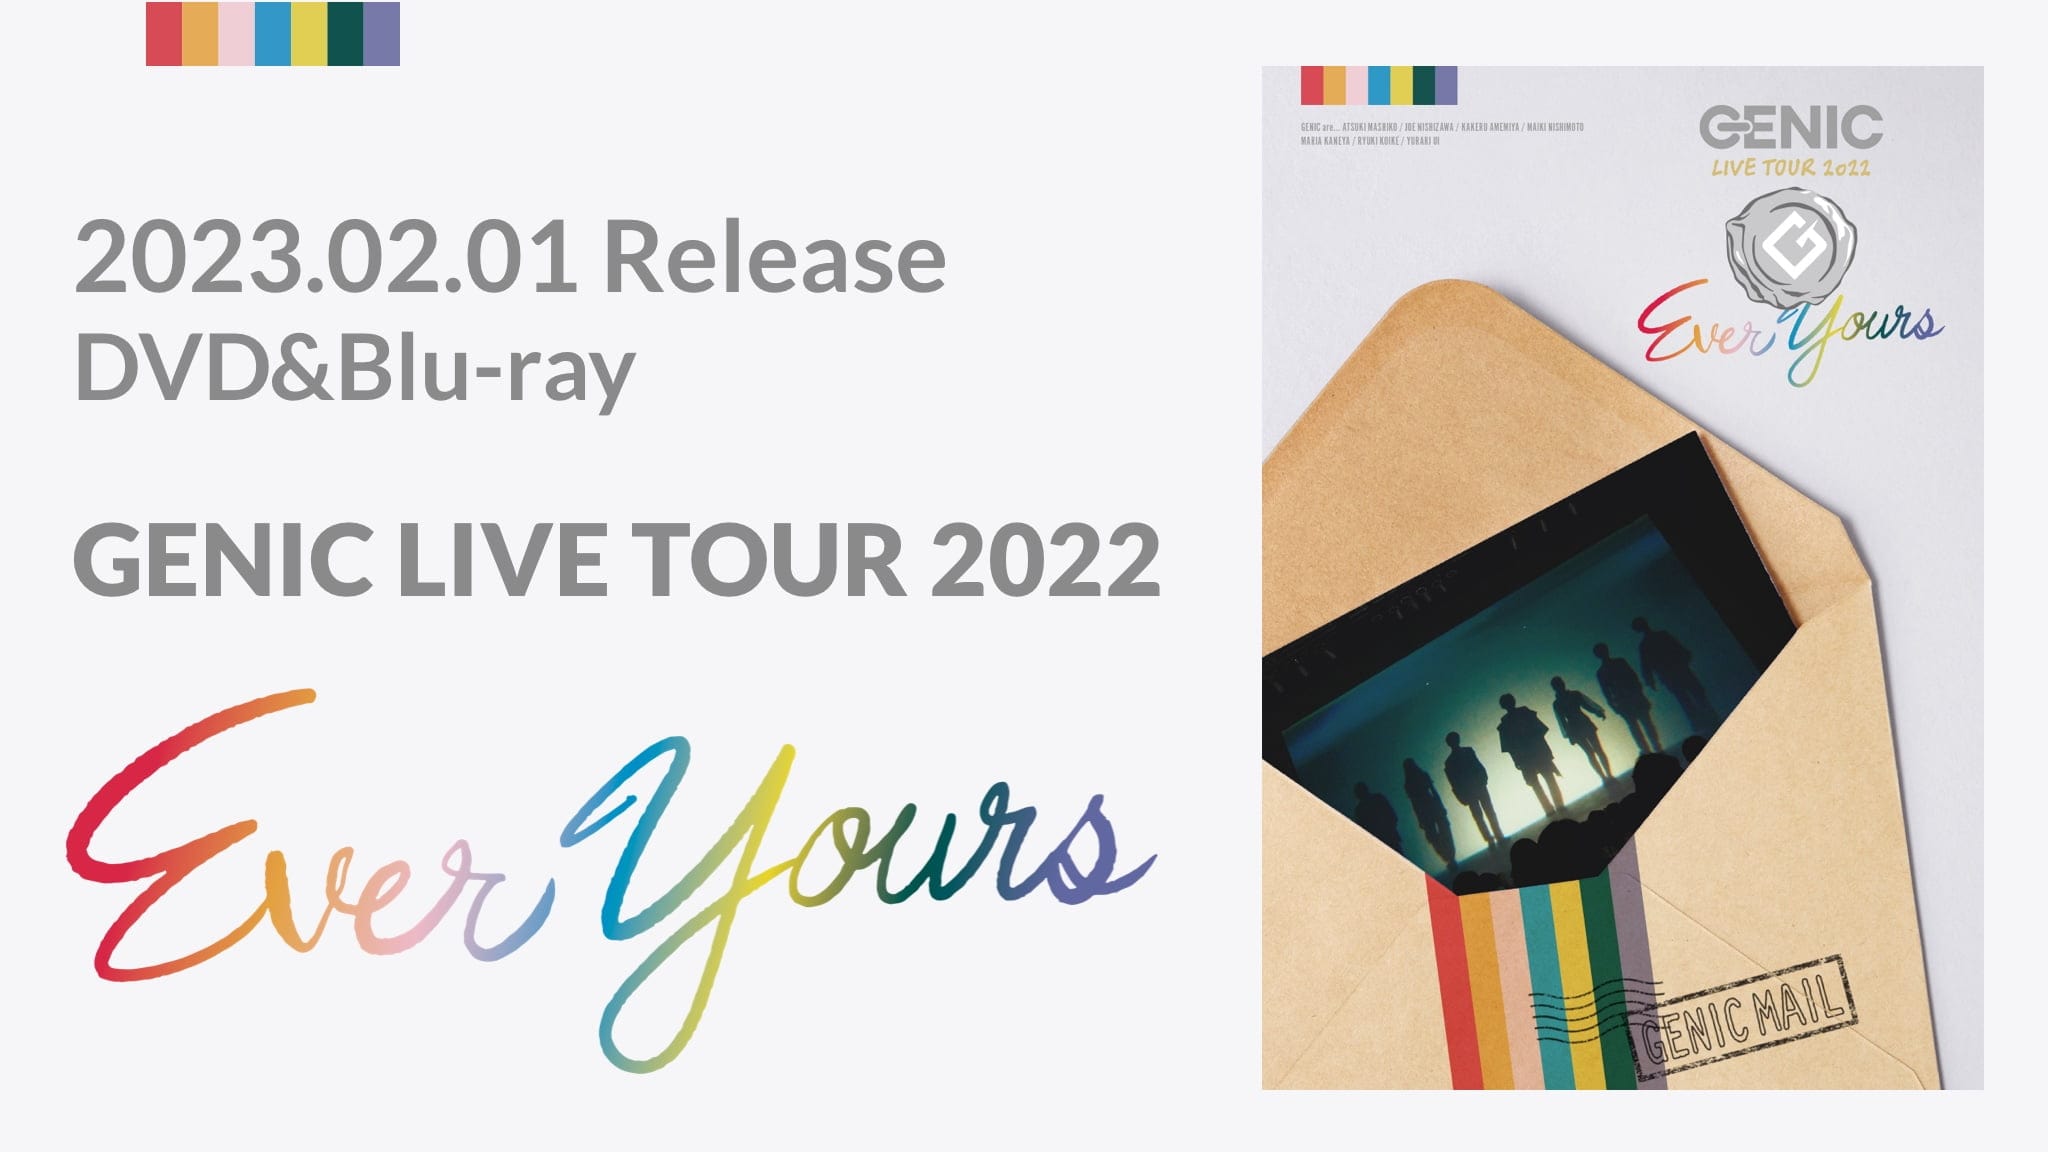 2023.02.01 Release DVD&Blu-ray GENIC LIVE TOUR 2022 「Ever Yours」